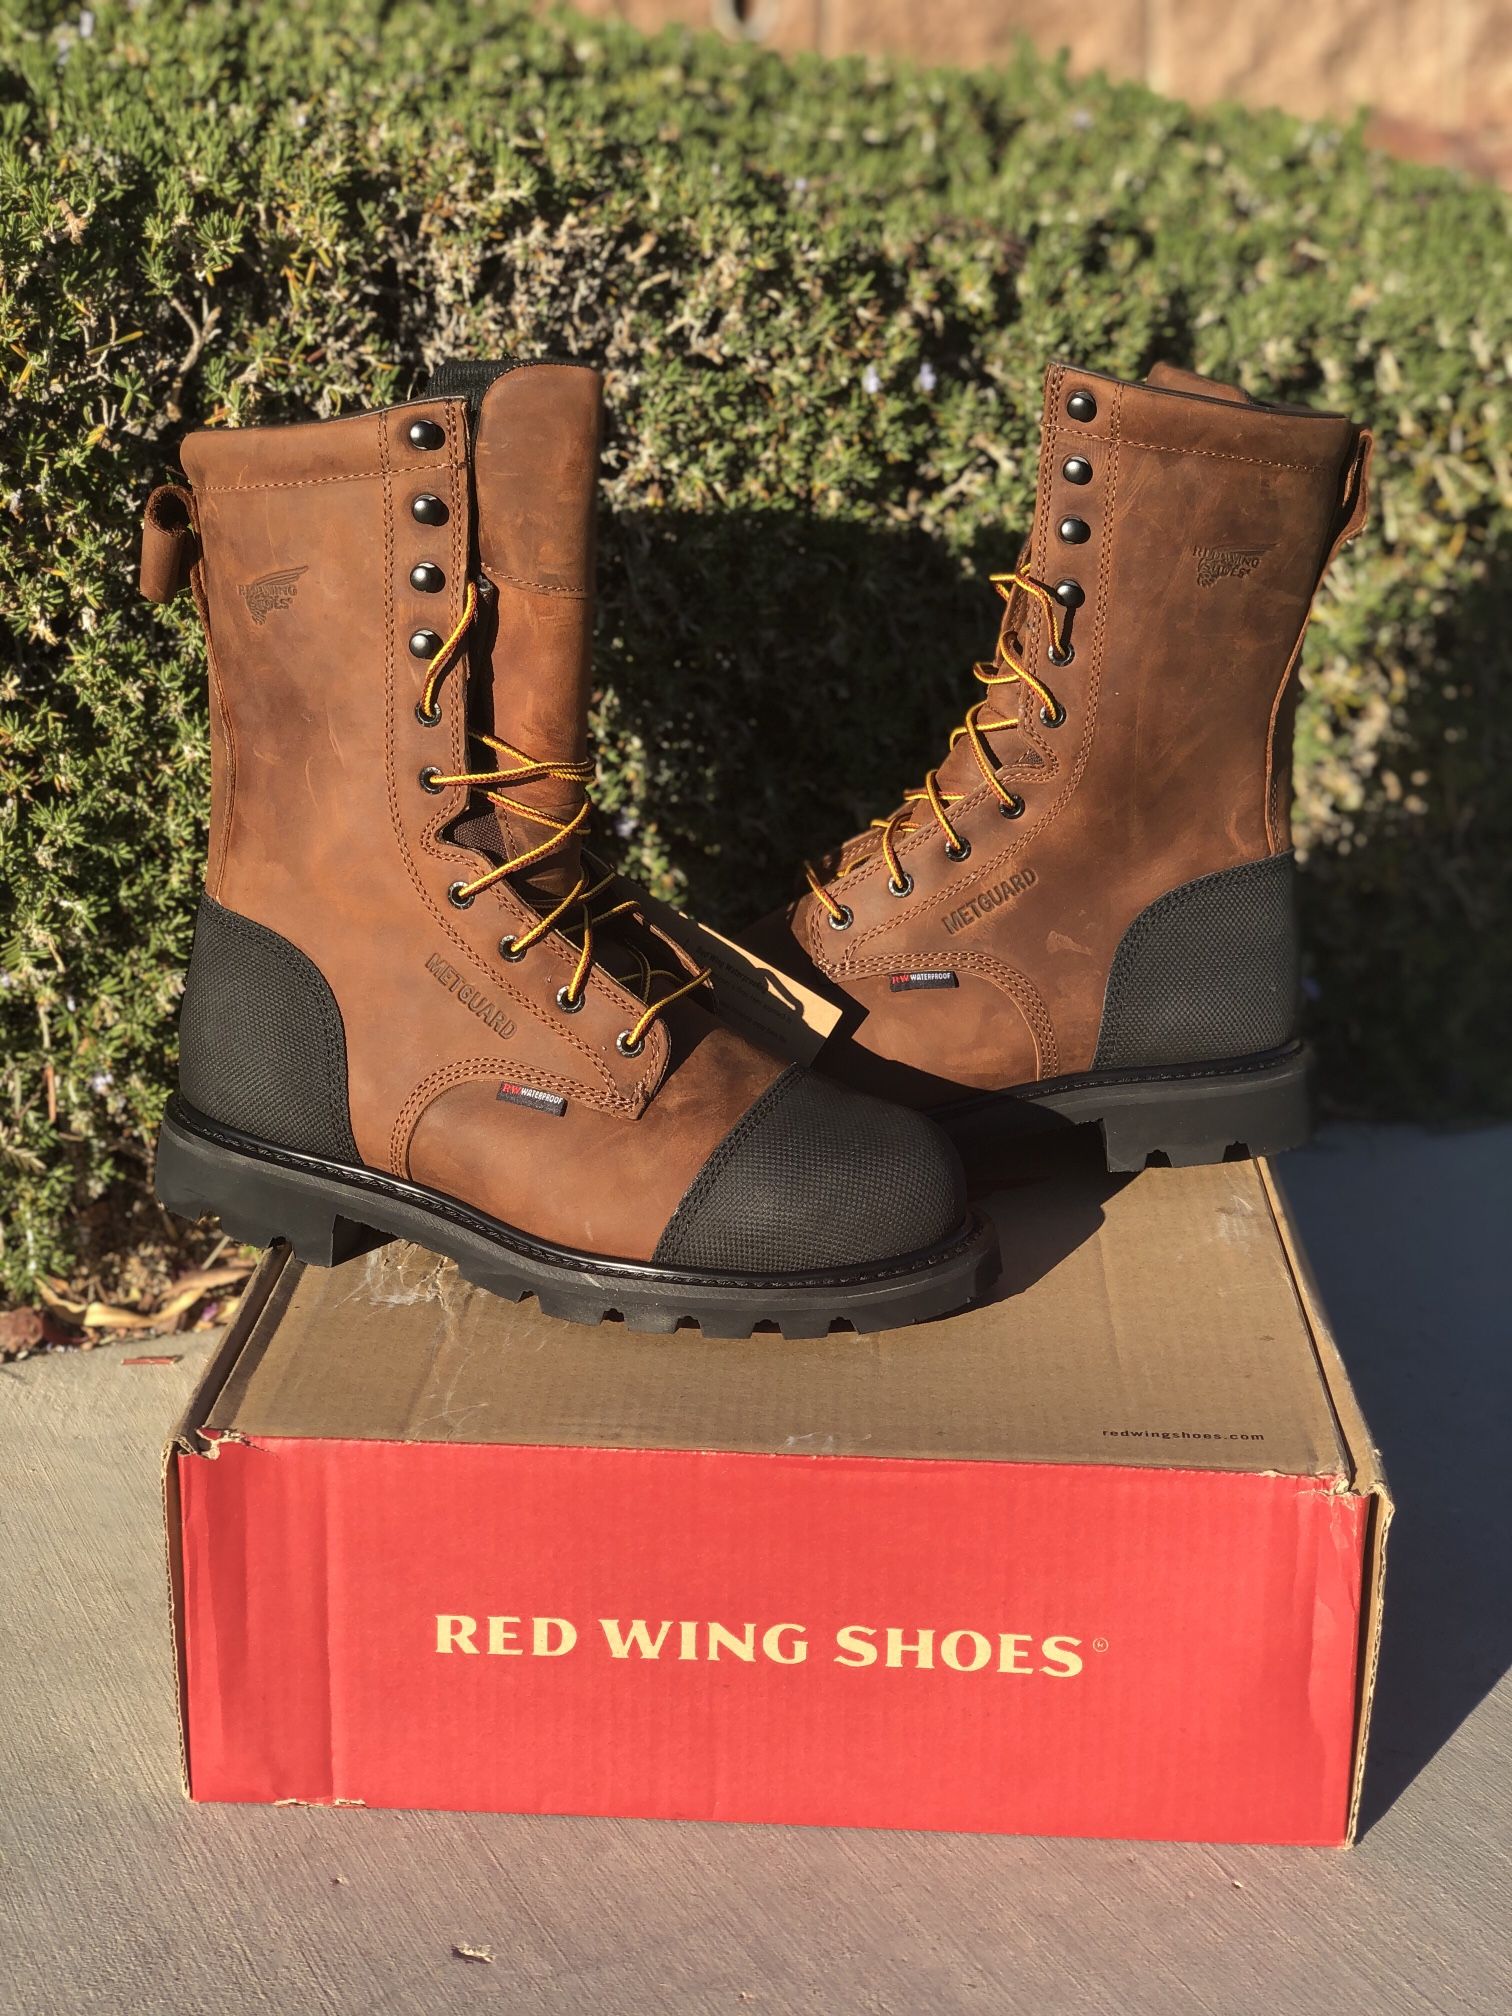 Red Wing Water Proof Met Guard Boots